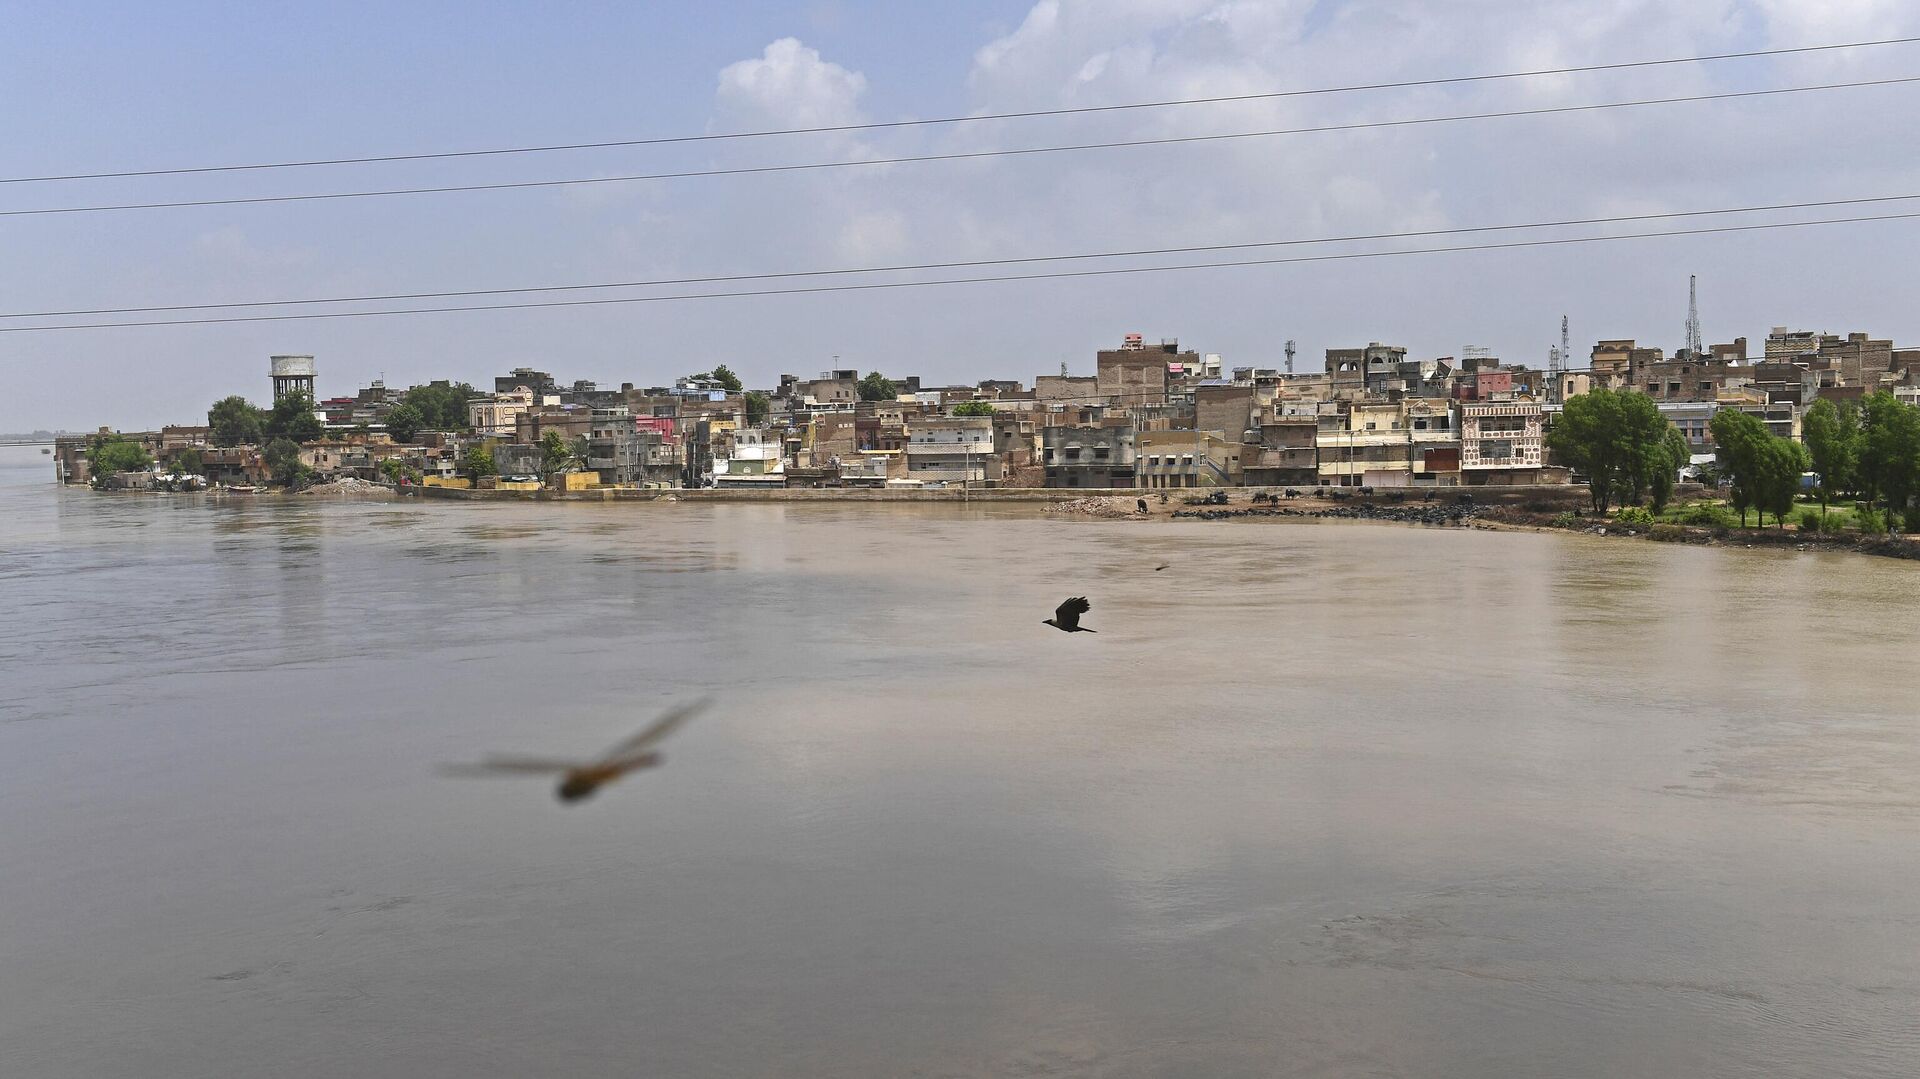 A general view of swollen river Indus is pictured along with residential area in flood hit Sukkur of Sindh province on August 28, 2022. (Photo by Asif HASSAN / AFP) - Sputnik India, 1920, 28.01.2023